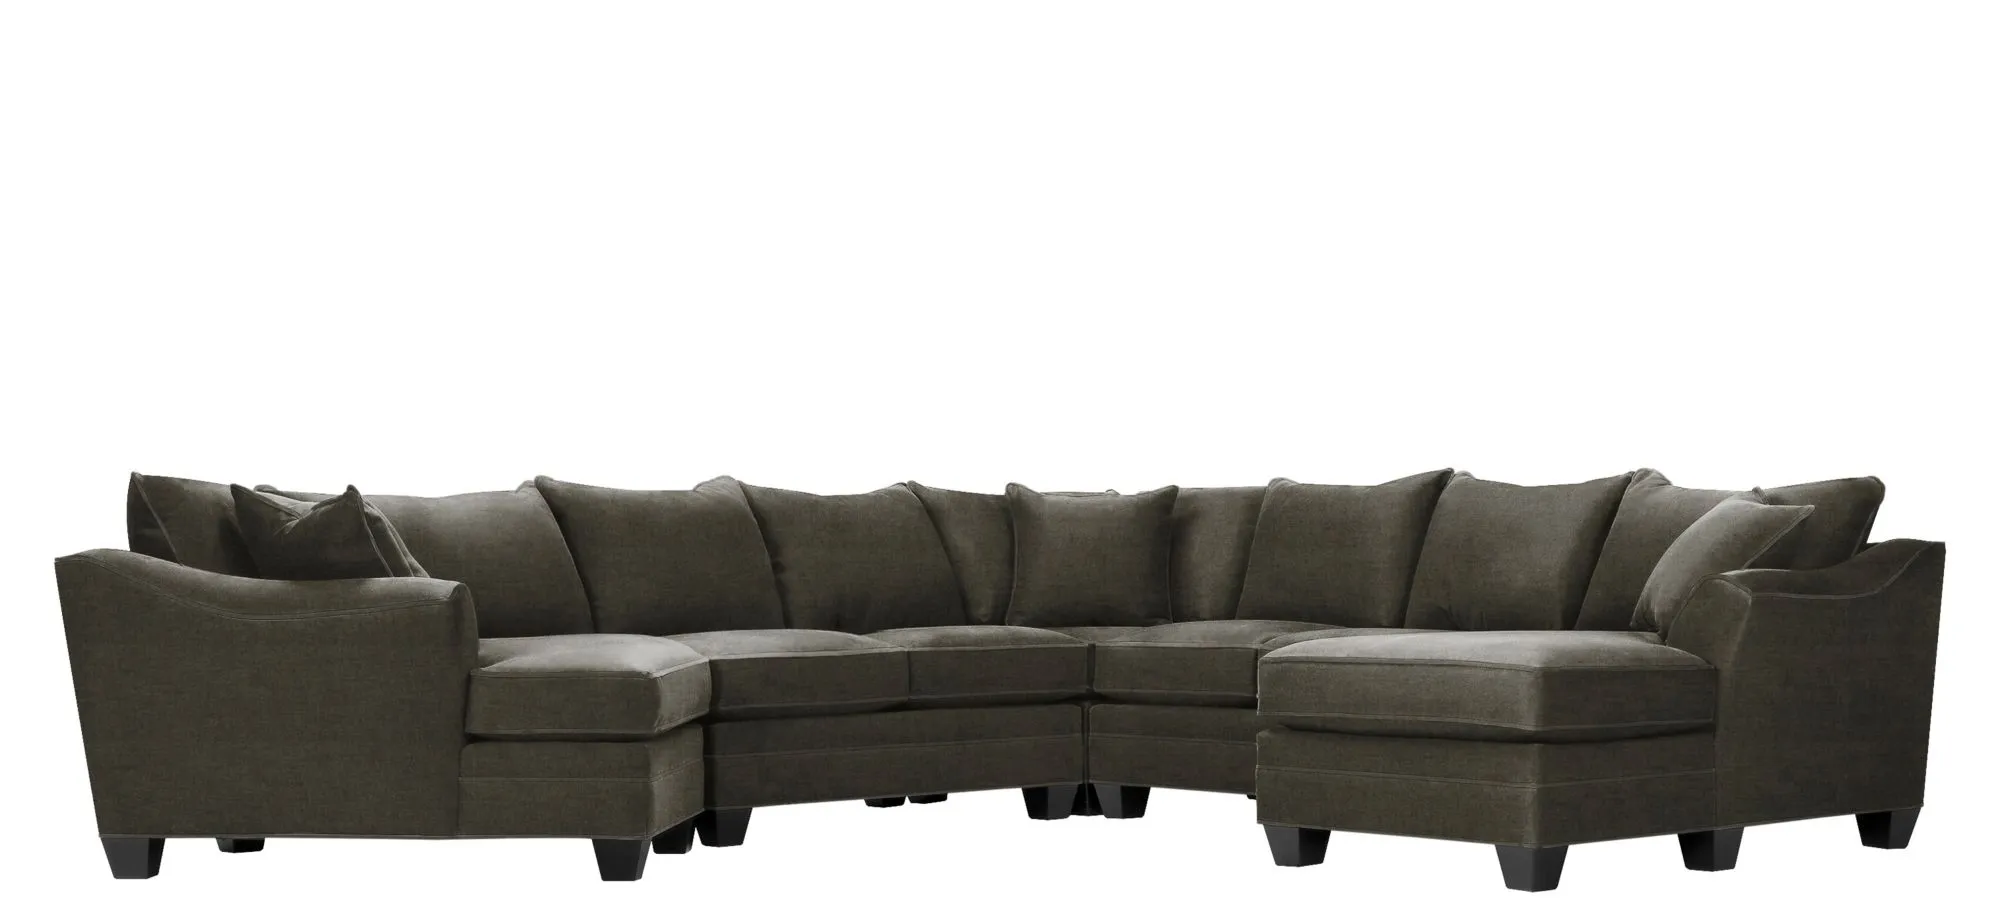 Foresthill 5-pc. Right Hand Facing Sectional Sofa in Santa Rosa Slate by H.M. Richards